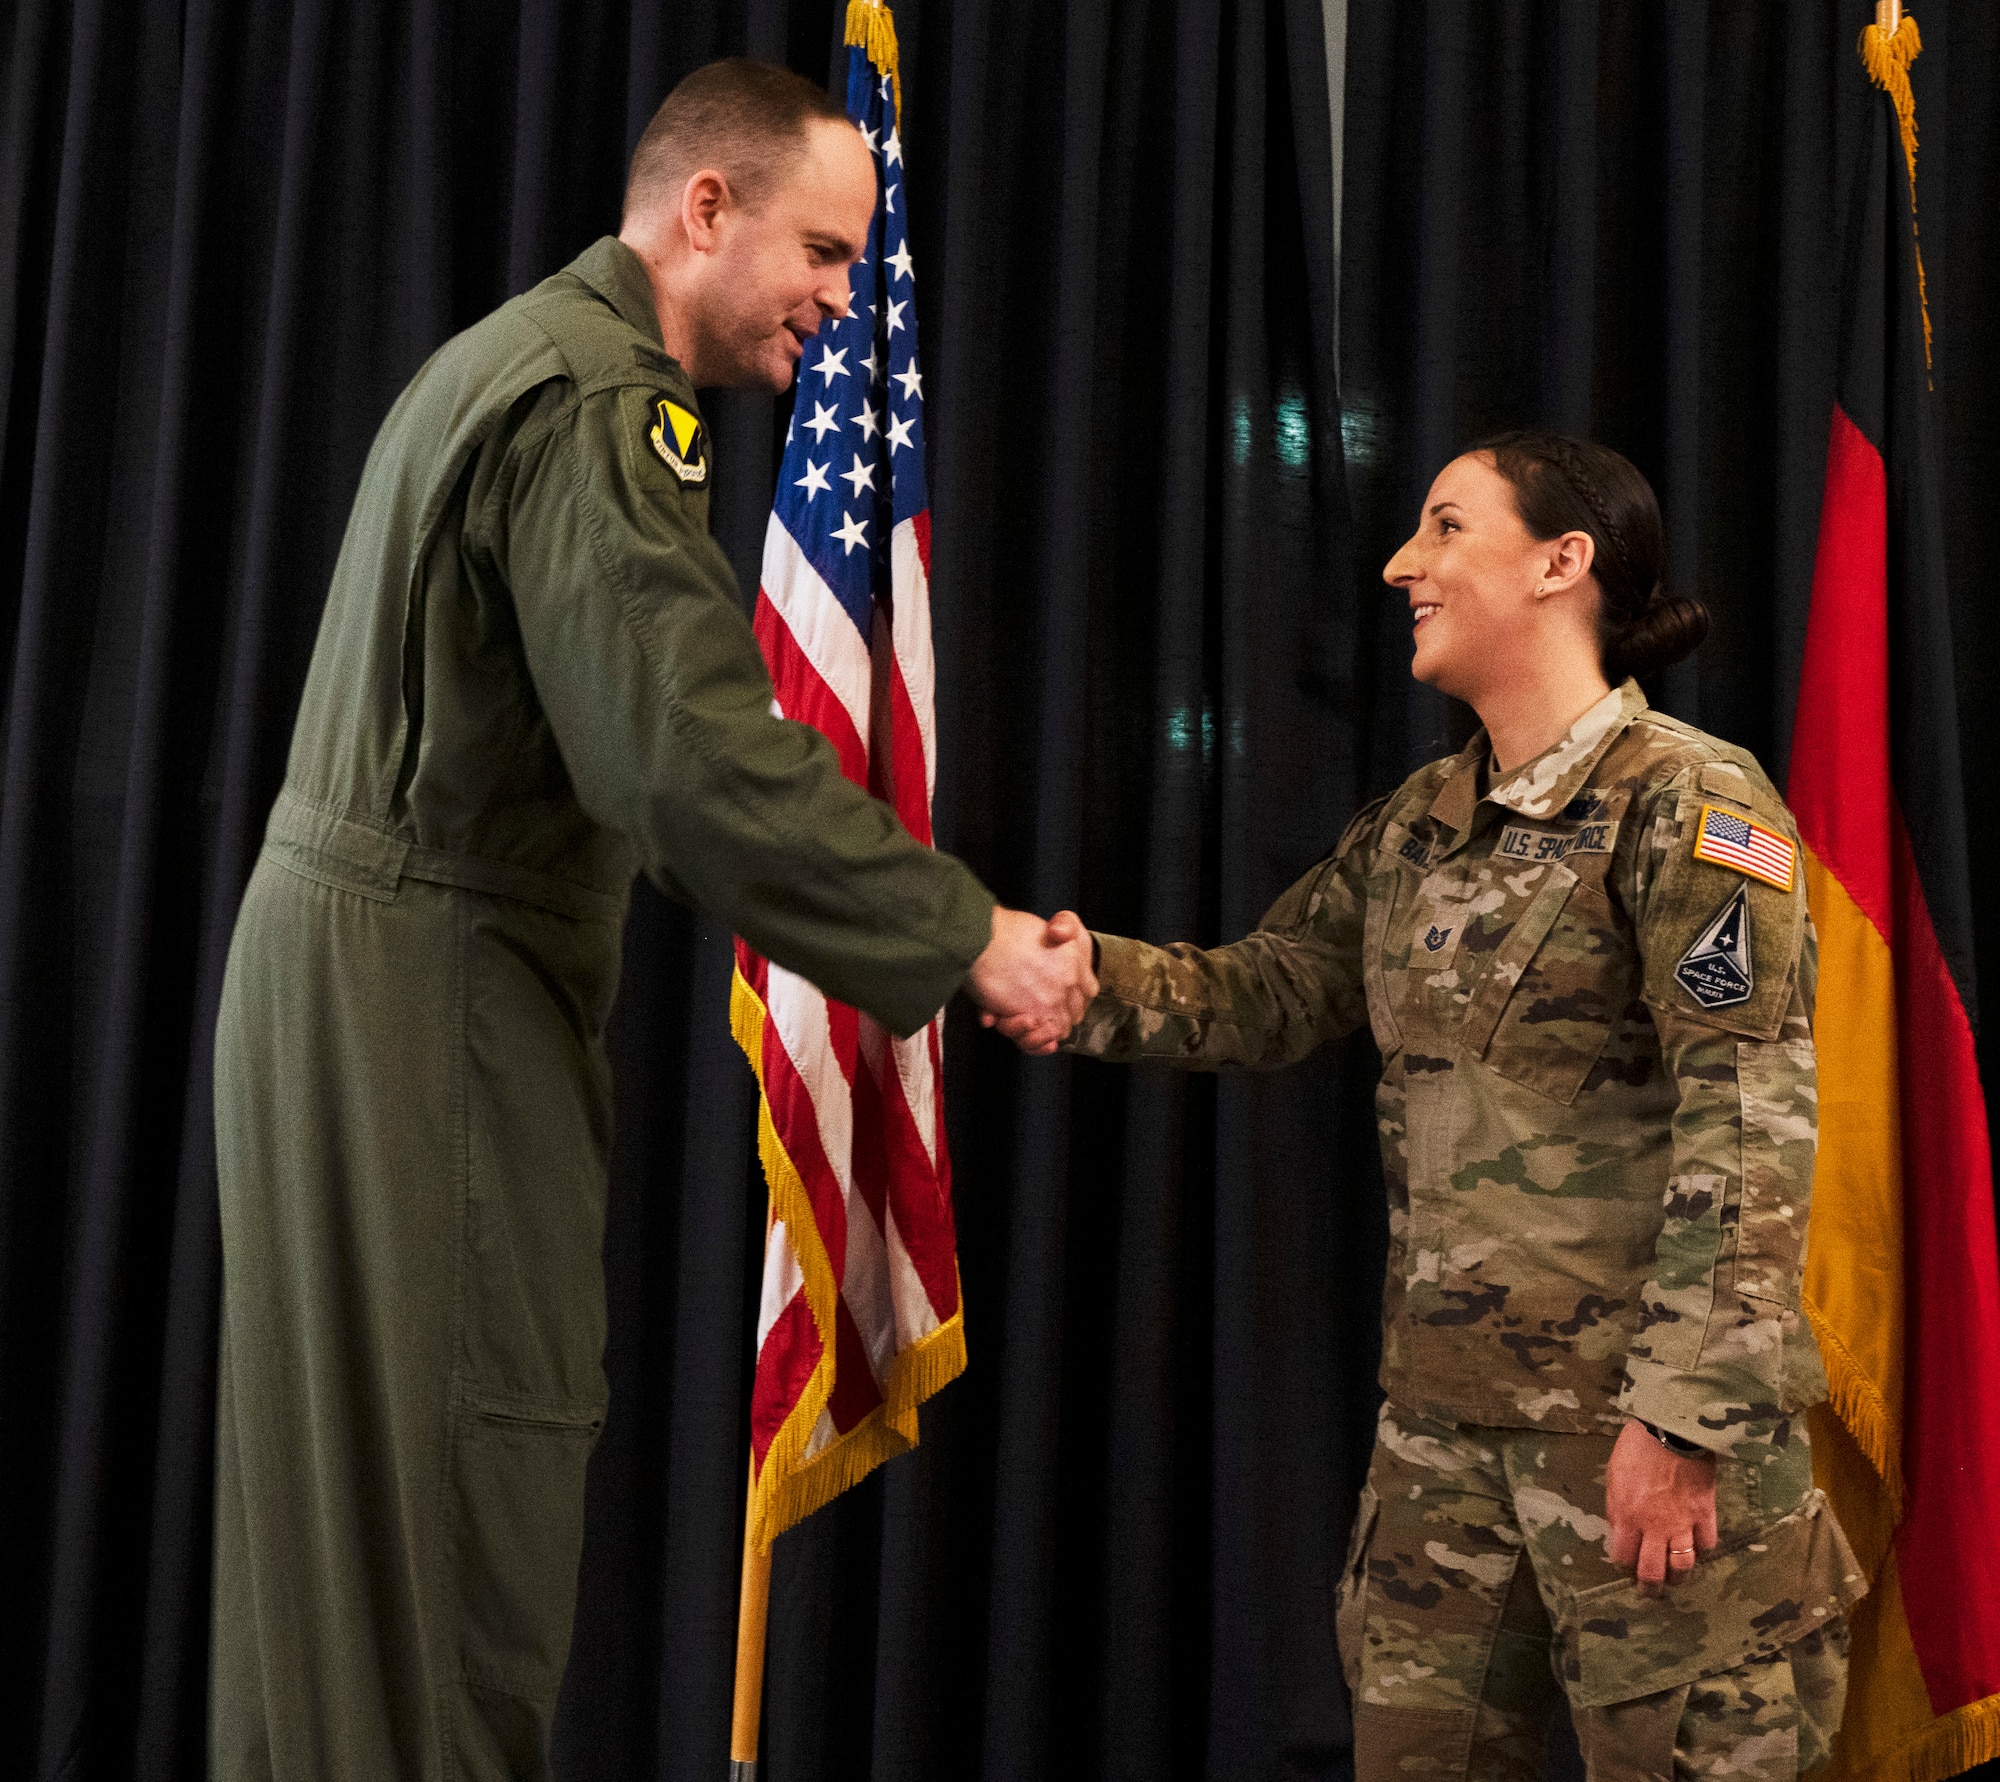 U.S. Space Force Tech. Sgt. Hollie Baire, 86th Communications Squadron non-commissioned officer in charge of the Technical Control Facility receives a coin from U.S. Air Force Col. Denny Davies, 86th Airlift Wing Vice Commander at an all call at Ramstein Air Base, Germany, March 24 2022. Baire was awarded the title of Airlifter of the Week due to her part in facilitating the installation of $750,000 of new Defense Information Systems. (U.S. Air Force photo by Senior Airman Thomas Karol)